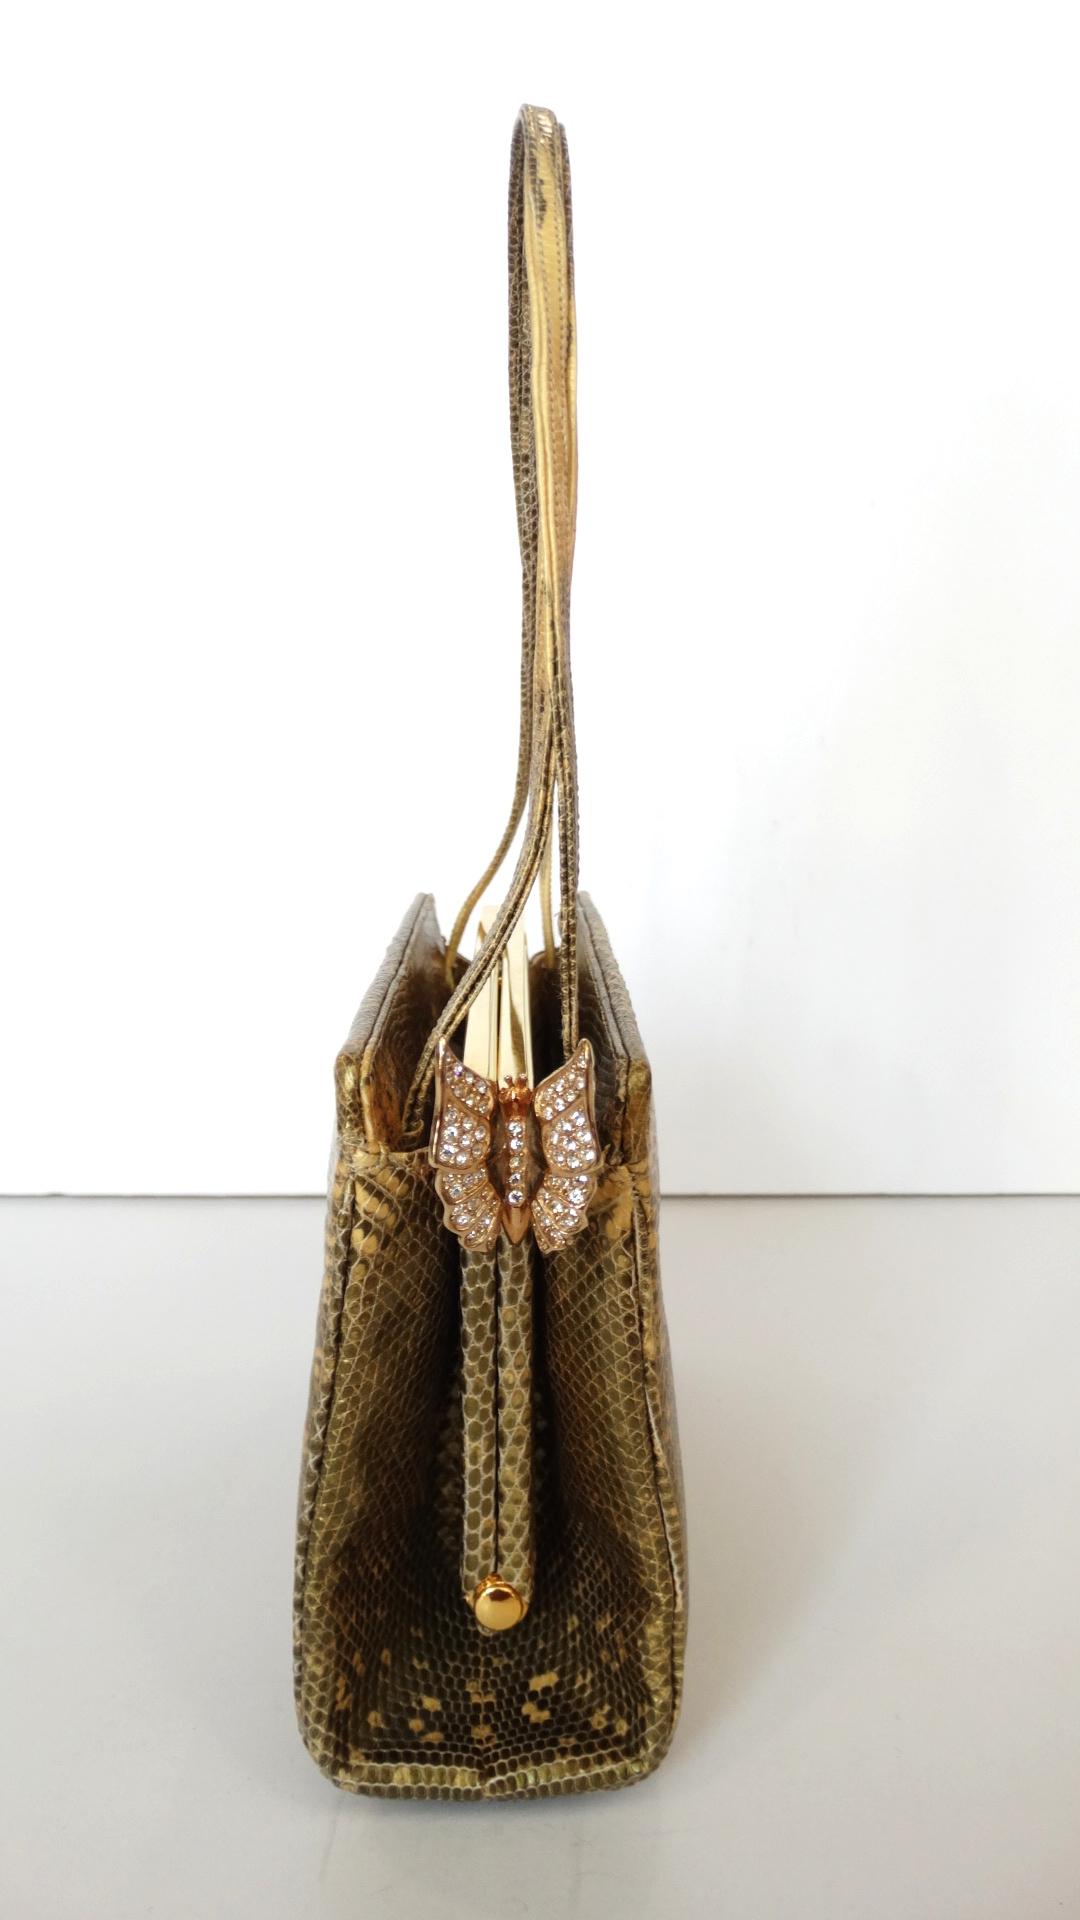 The most adorable little Judith Leiber snakeskin handbag bag! Constructed of a unique spotted gold snakeskin in a structured rectangular silhouette. Thin shoulder straps crafted from the same skin. Rhinestone enameled butterfly clasp on the side of